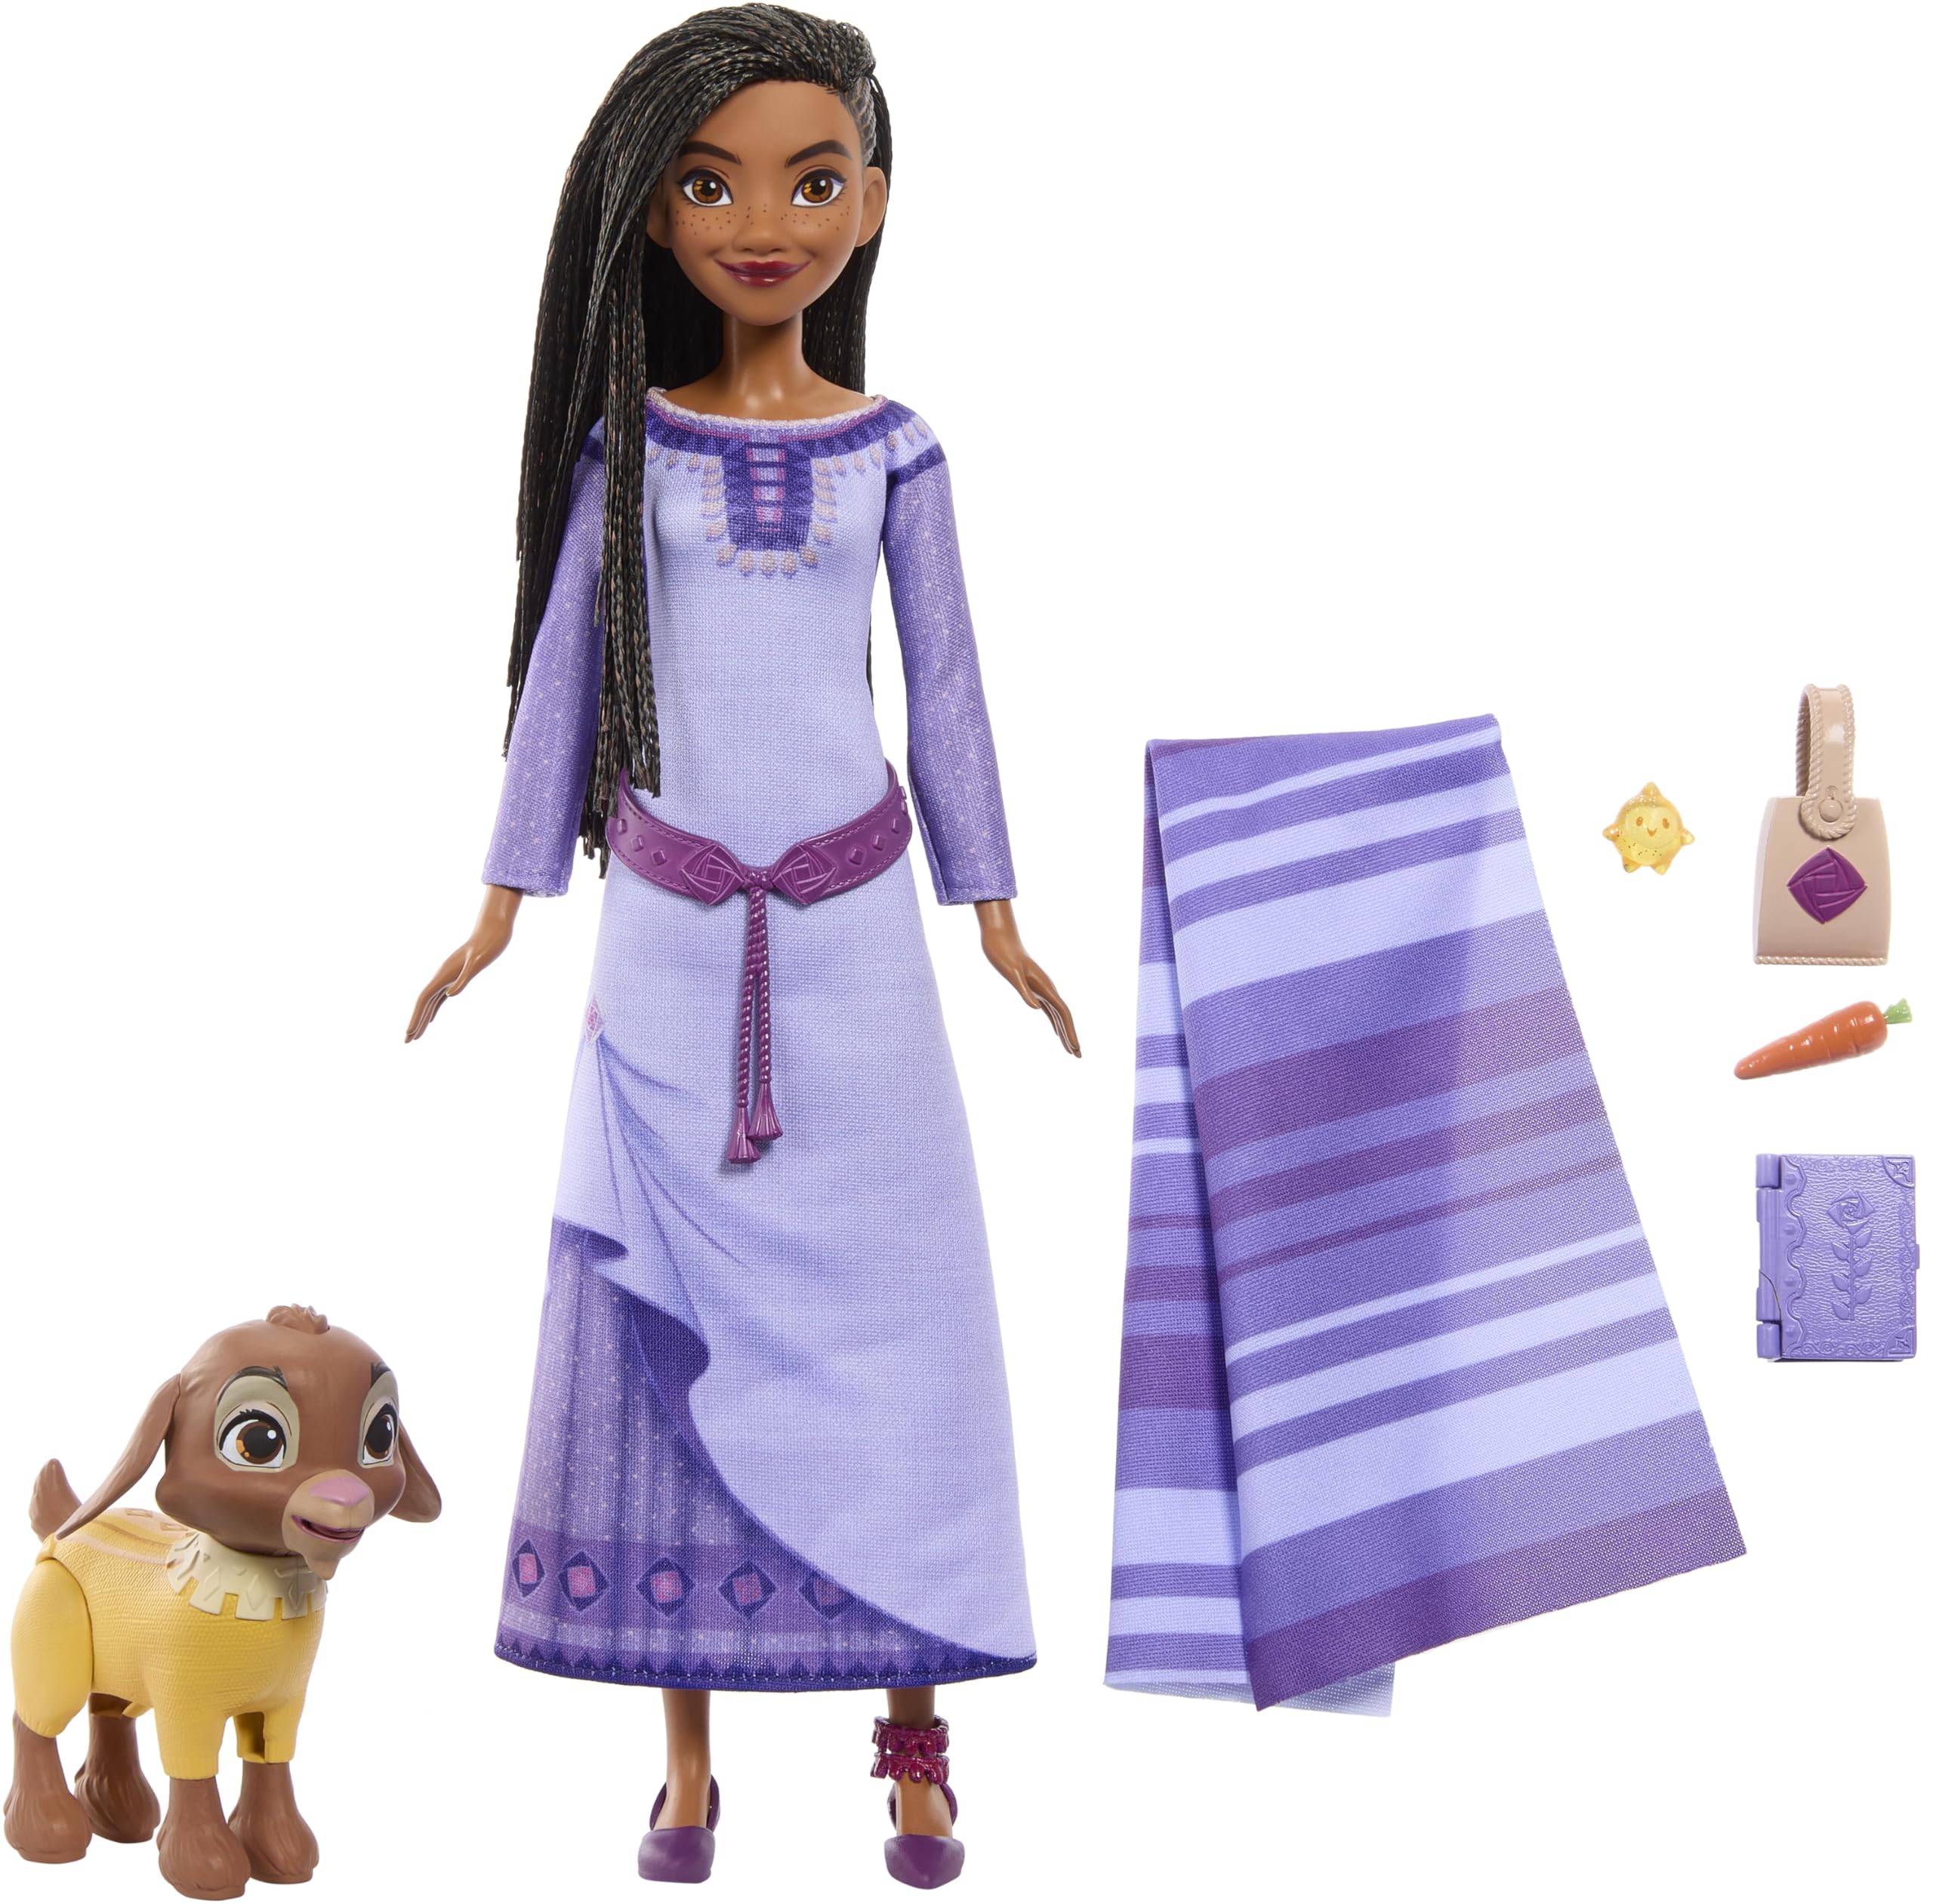 Mattel Disney Wish Asha of Rosas Adventure Pack Doll, Posable Fashion Doll with Removable Fashion, Animal Friends and Accessories, Toys Inspired by The Movie